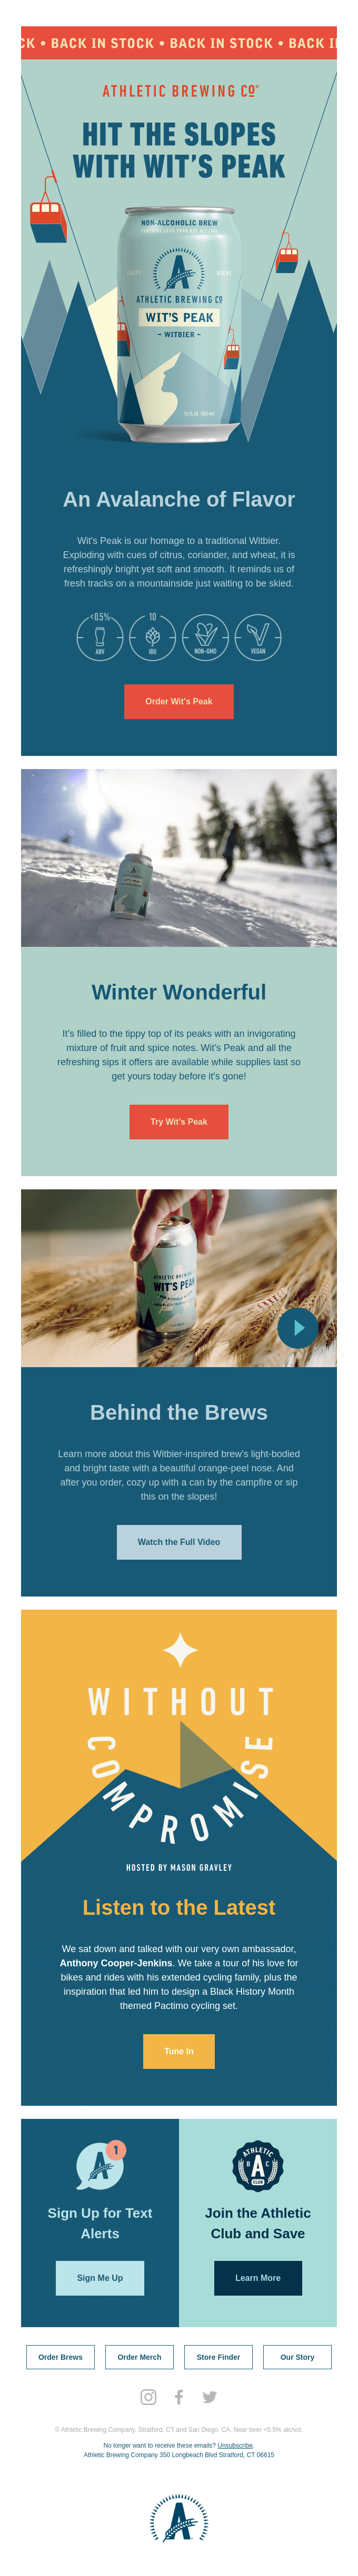 Wit's Peak: Back in Stock ⛷️ - Athletic Brewing Email Newsletter